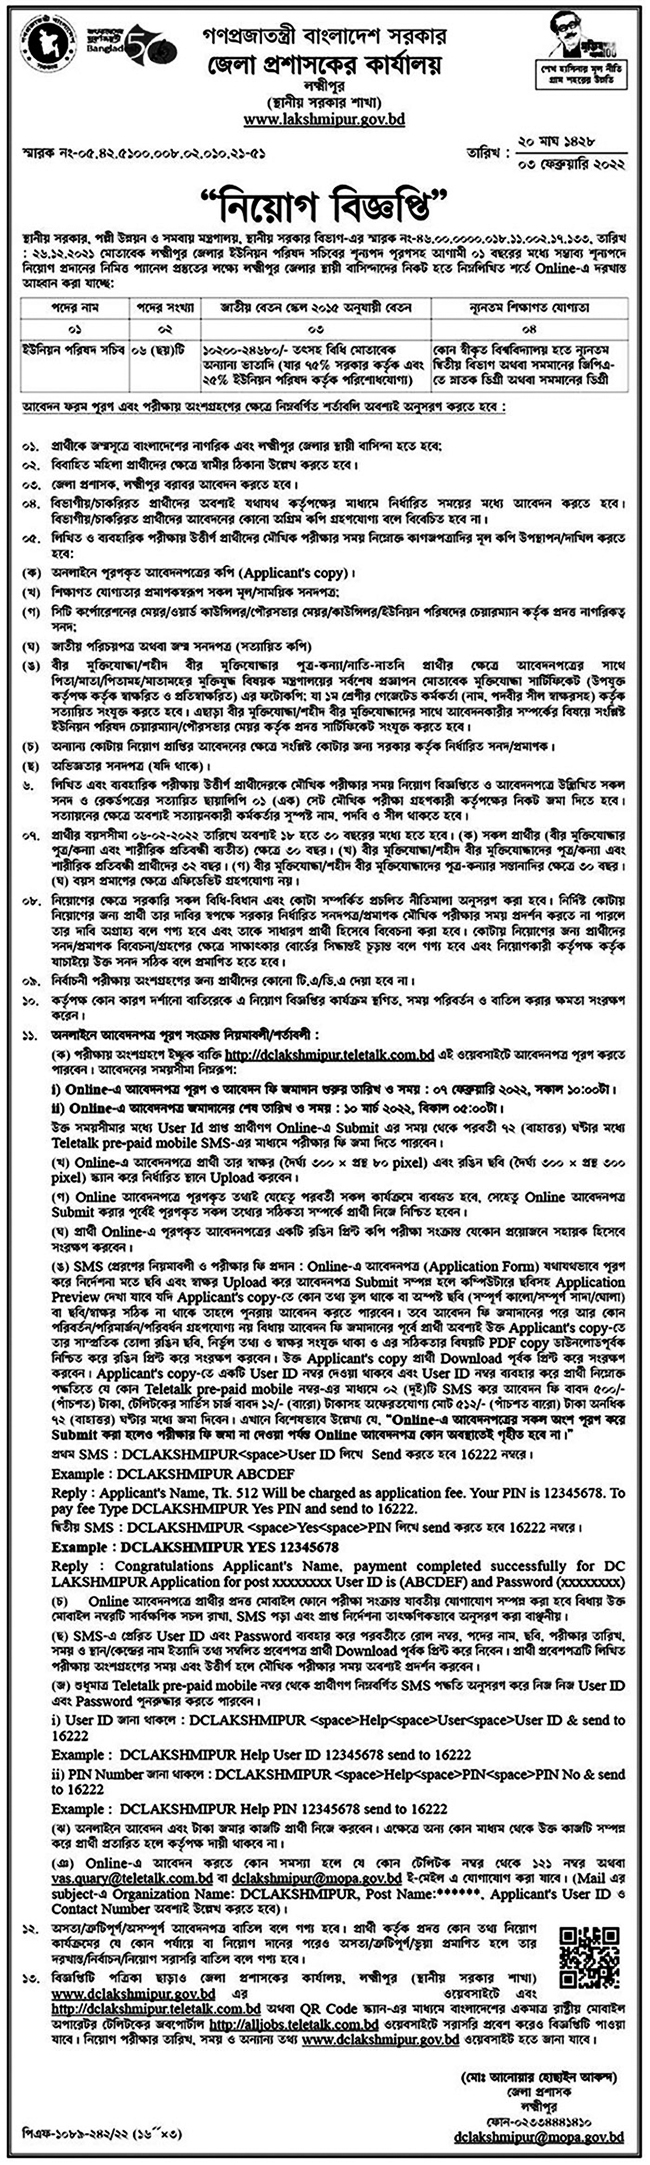 Office of District Commissioner, Laxmipur Job Circular